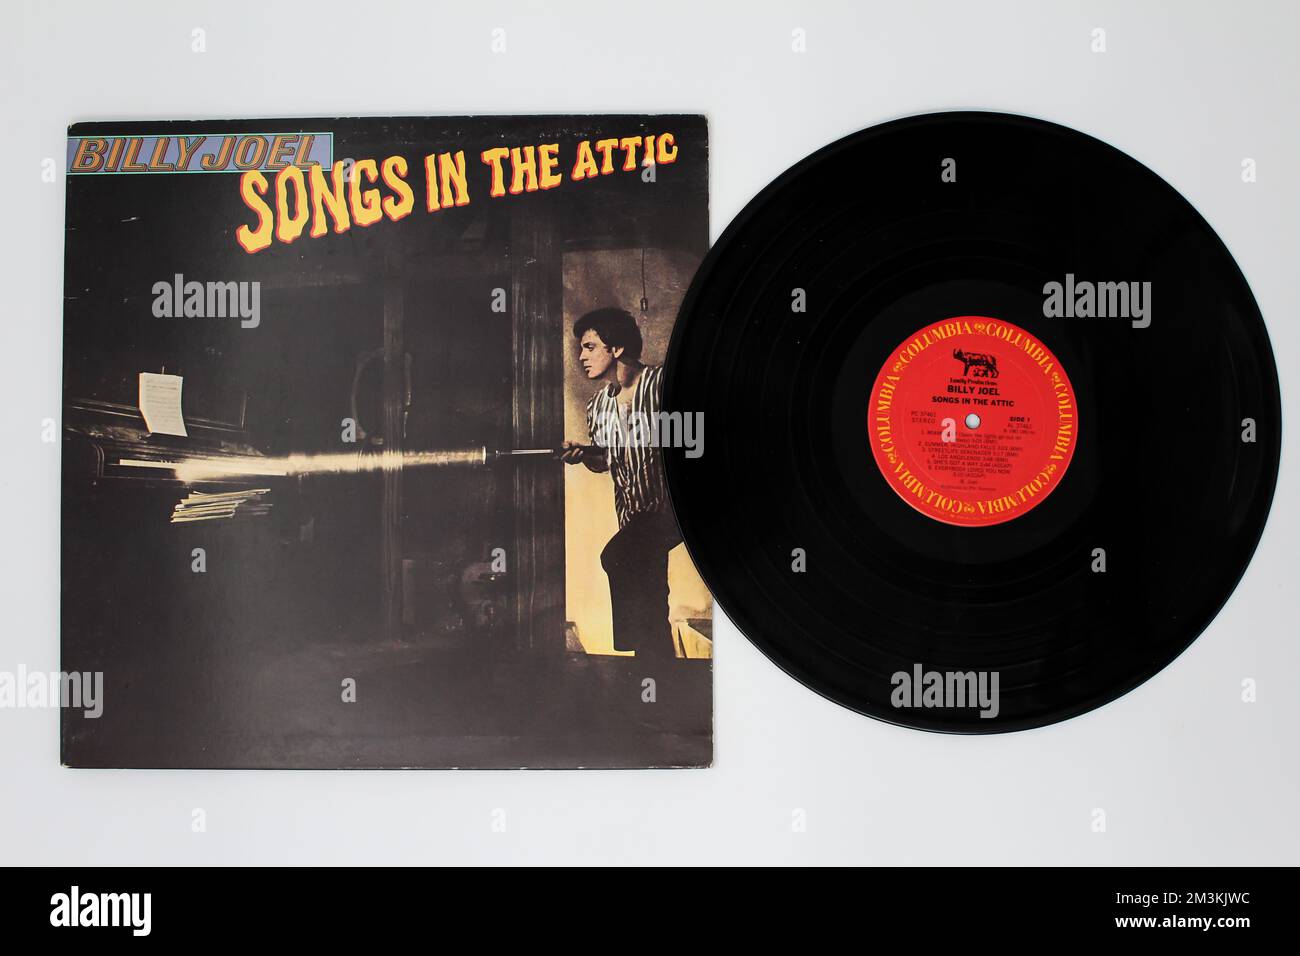 Pop rock and soft rock artist, Billy Joel music album on vinyl record LP disc. Titled: Songs in the Attic album cover Stock Photo